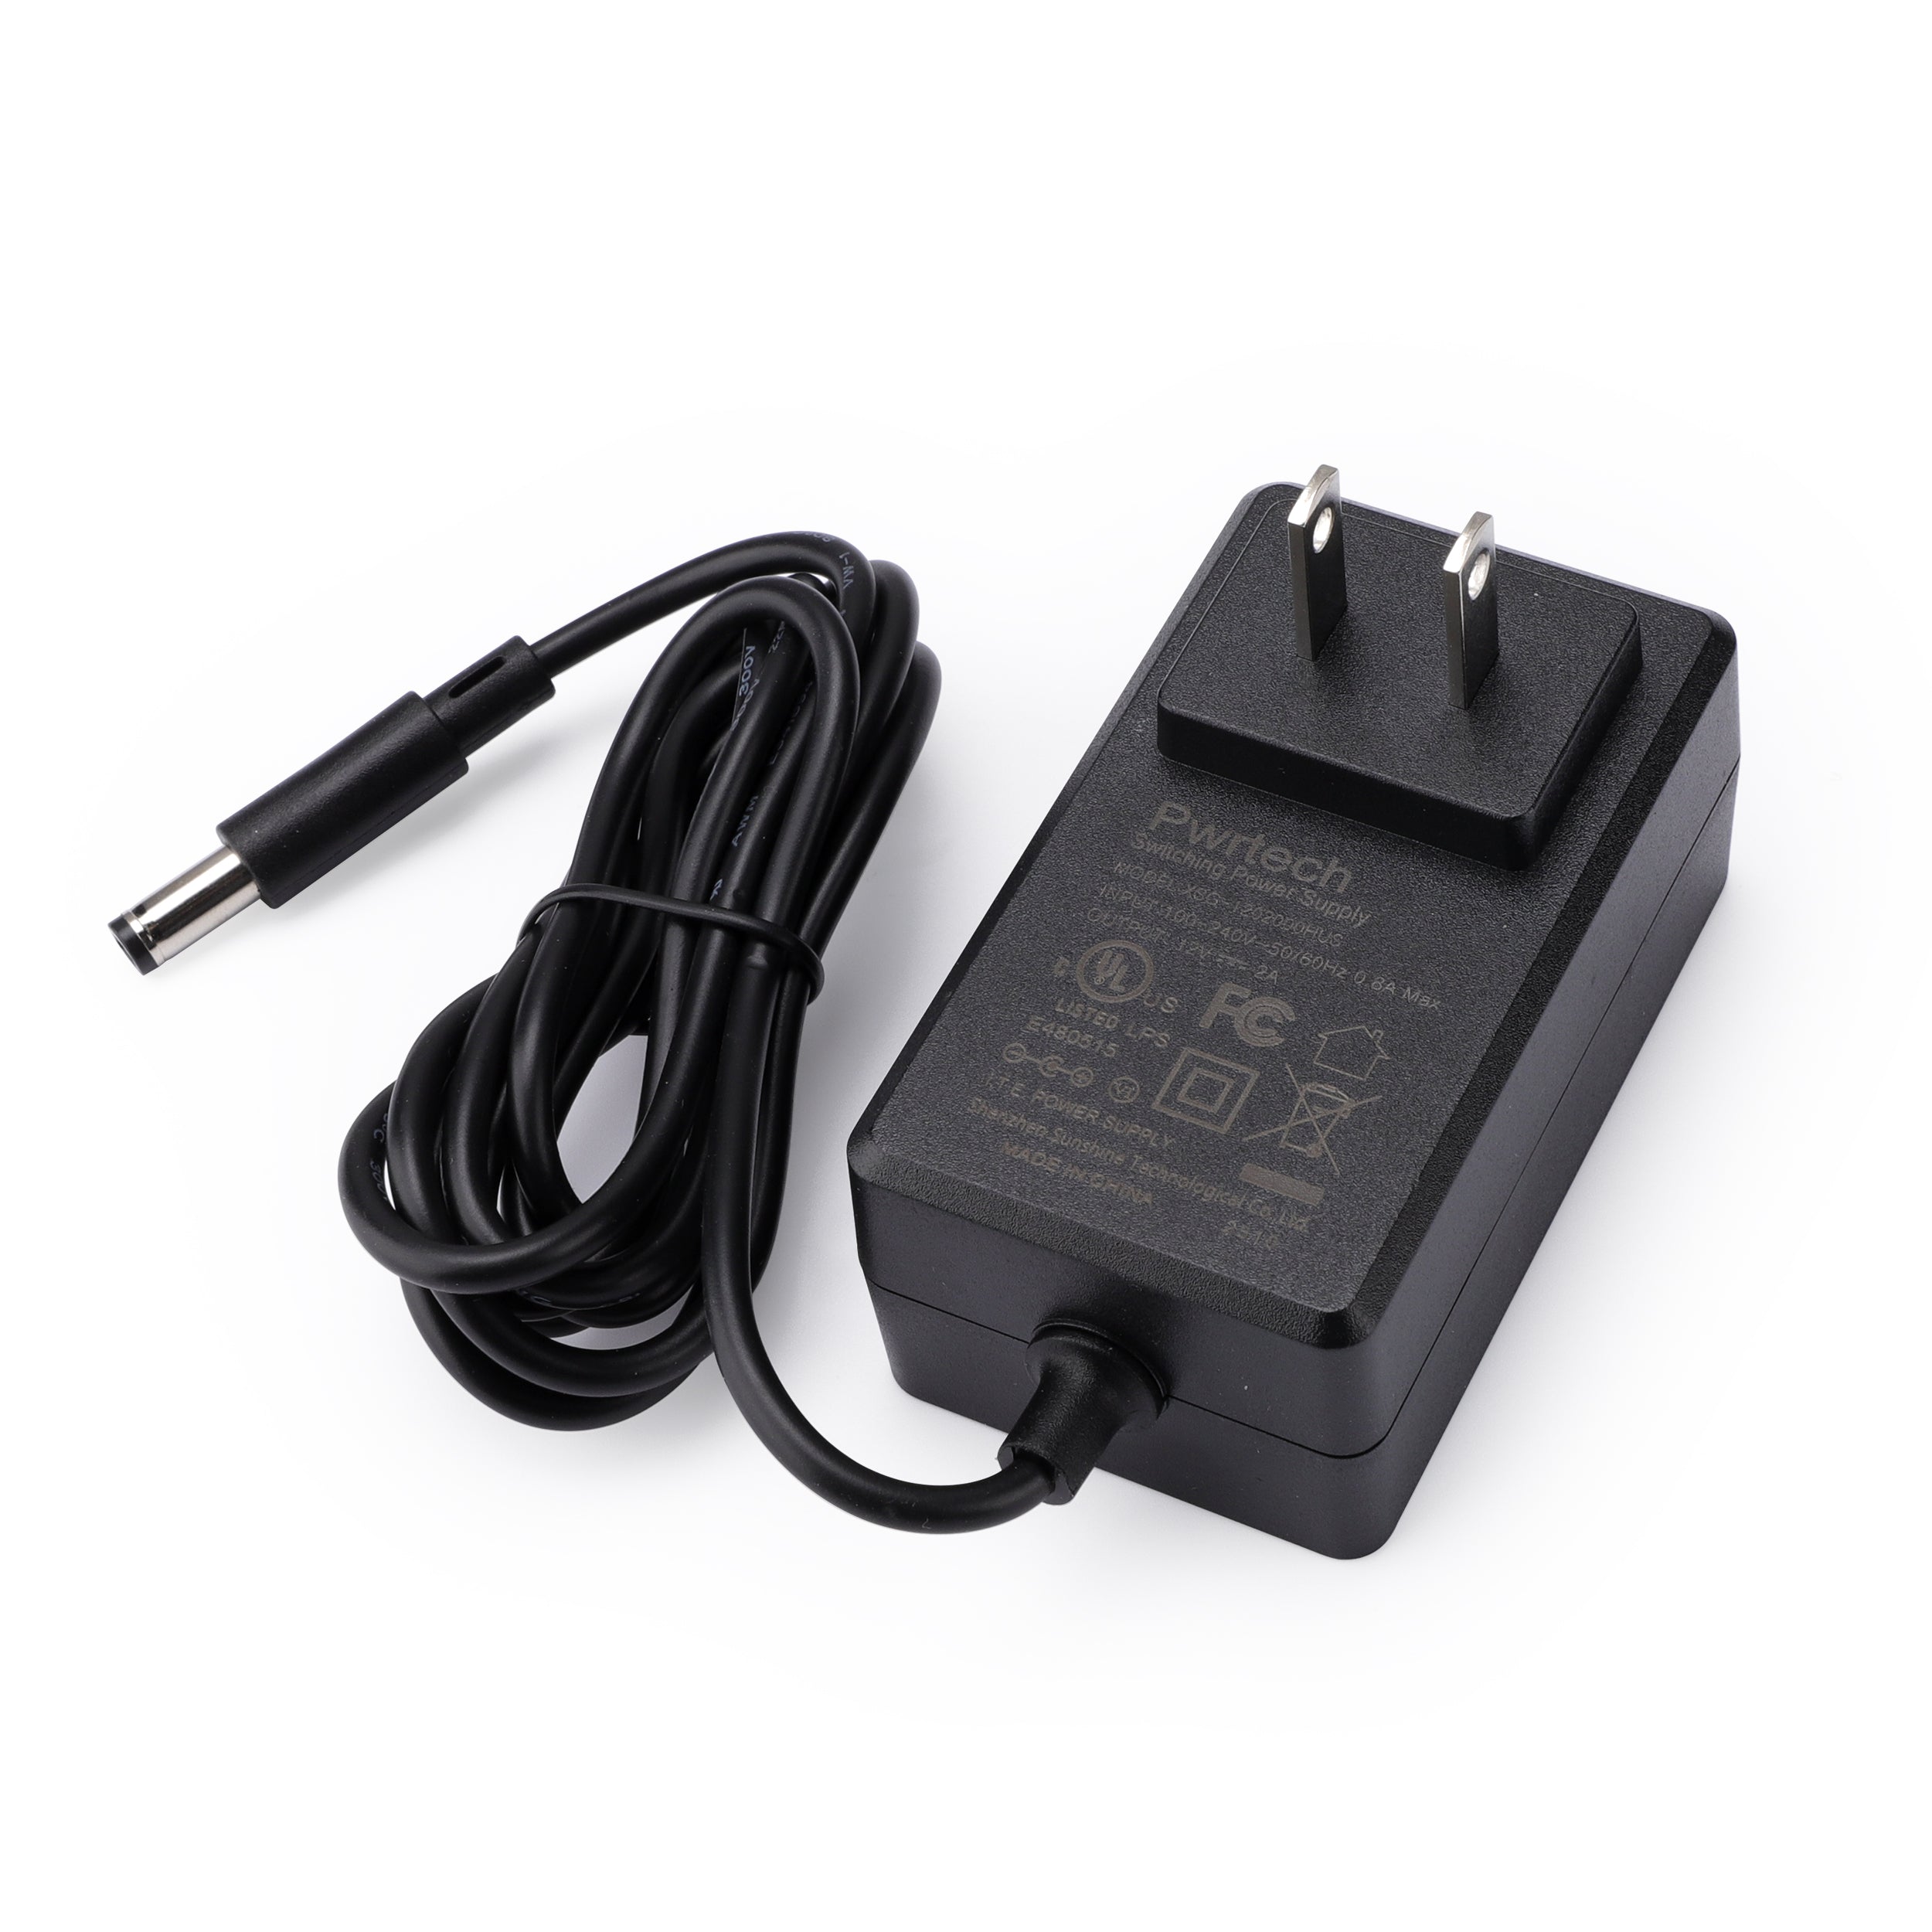 Pwrtech Brand New 12V 2A 5.5x2.5mm Center Positive AC-DC Adapter Charger Power Supply